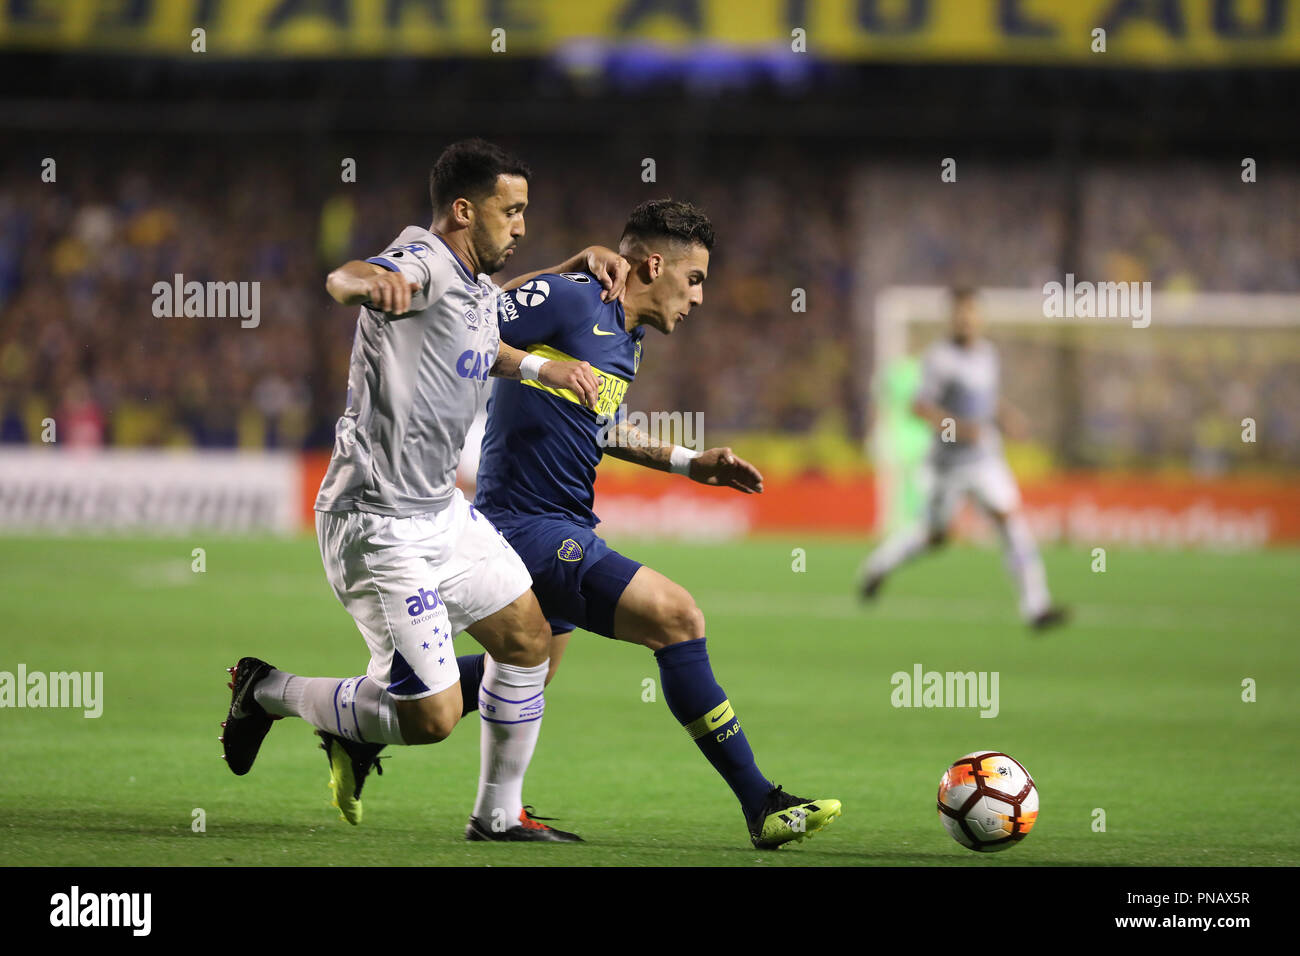 BUENOS AIRES, ARGENTINA - SEPTEMBER 19, 2018: Cristian Pavon (boca) trying to outrun the defense in Buenos Aires, Argentina Stock Photo